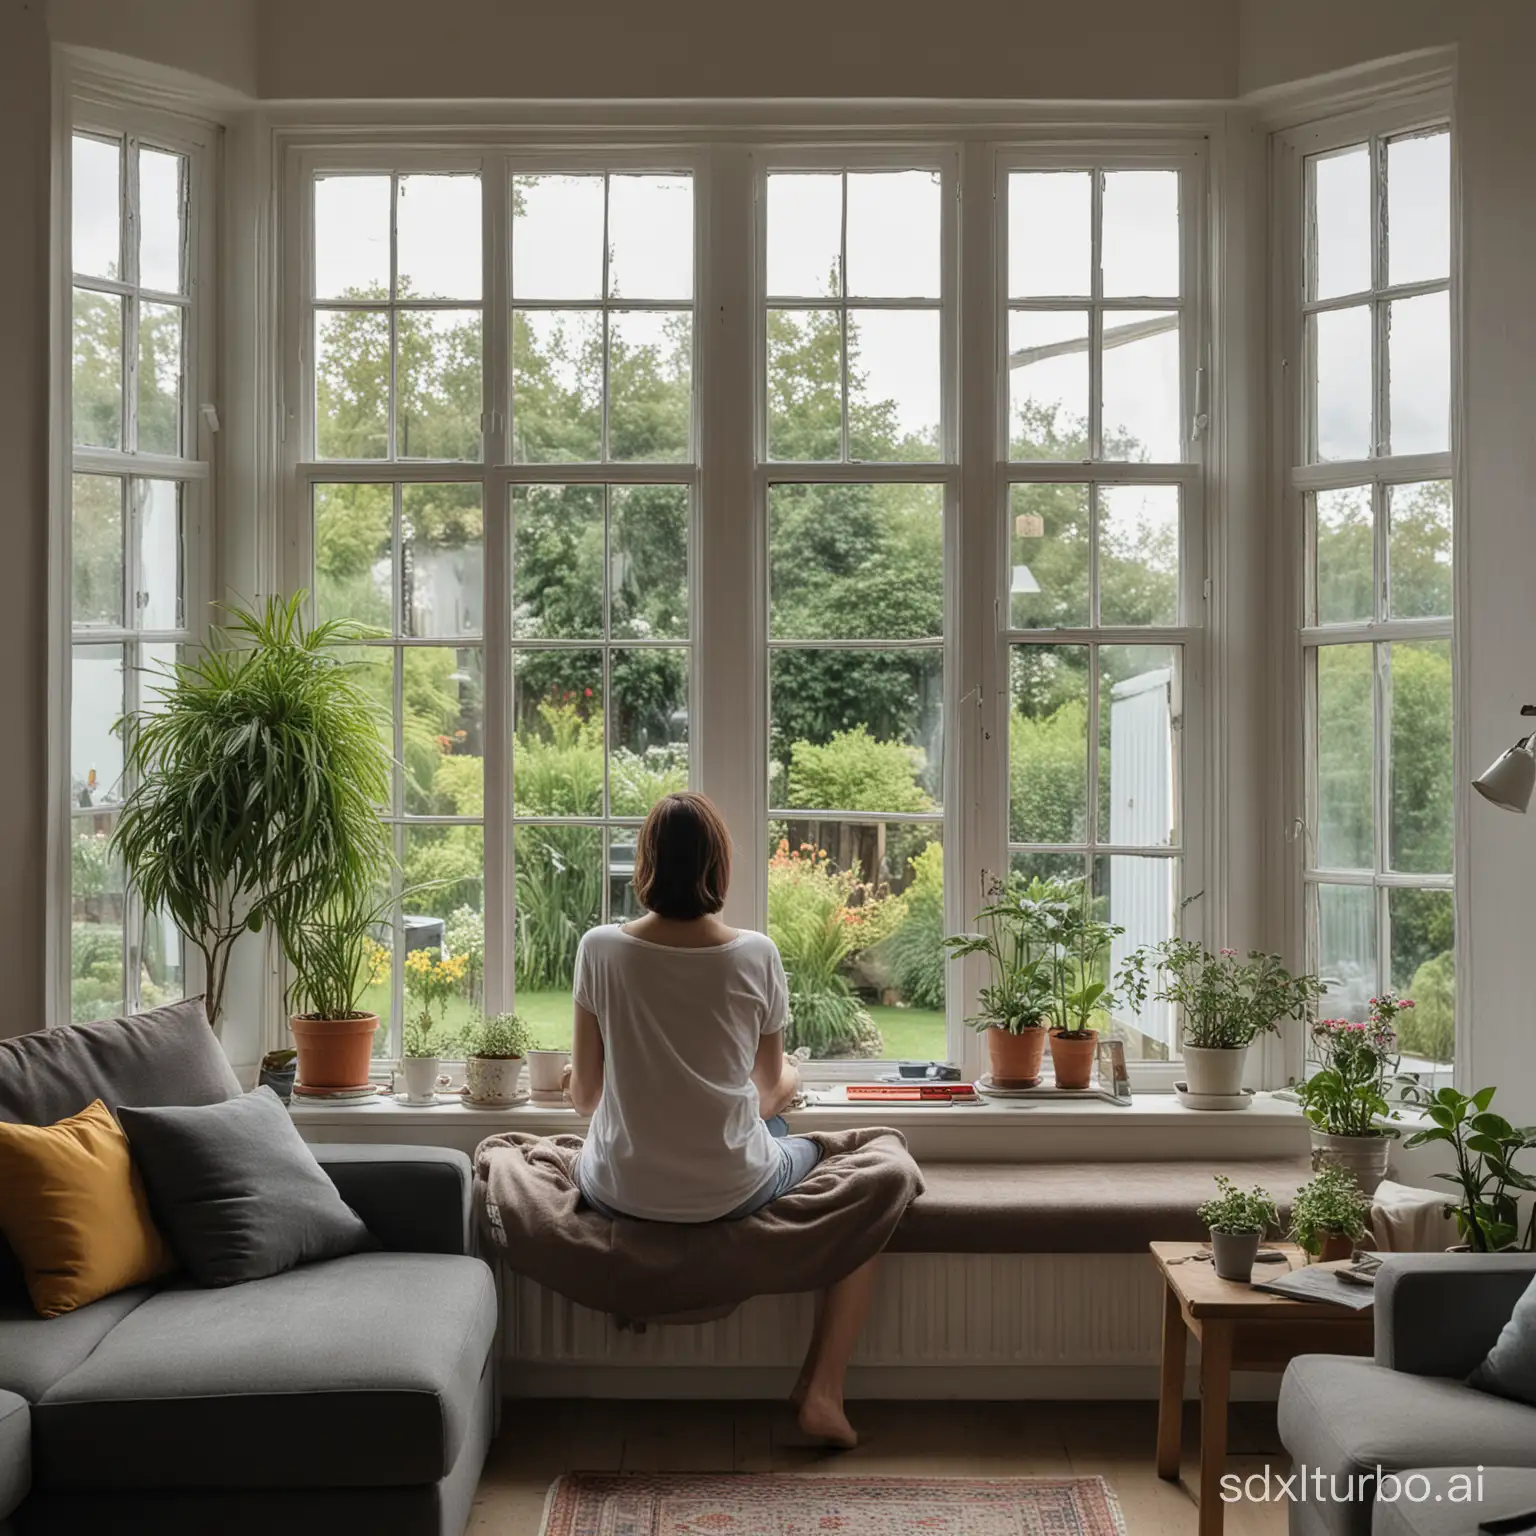 a woman sitting in her livingroom in front of a window, lokking outside into the garden